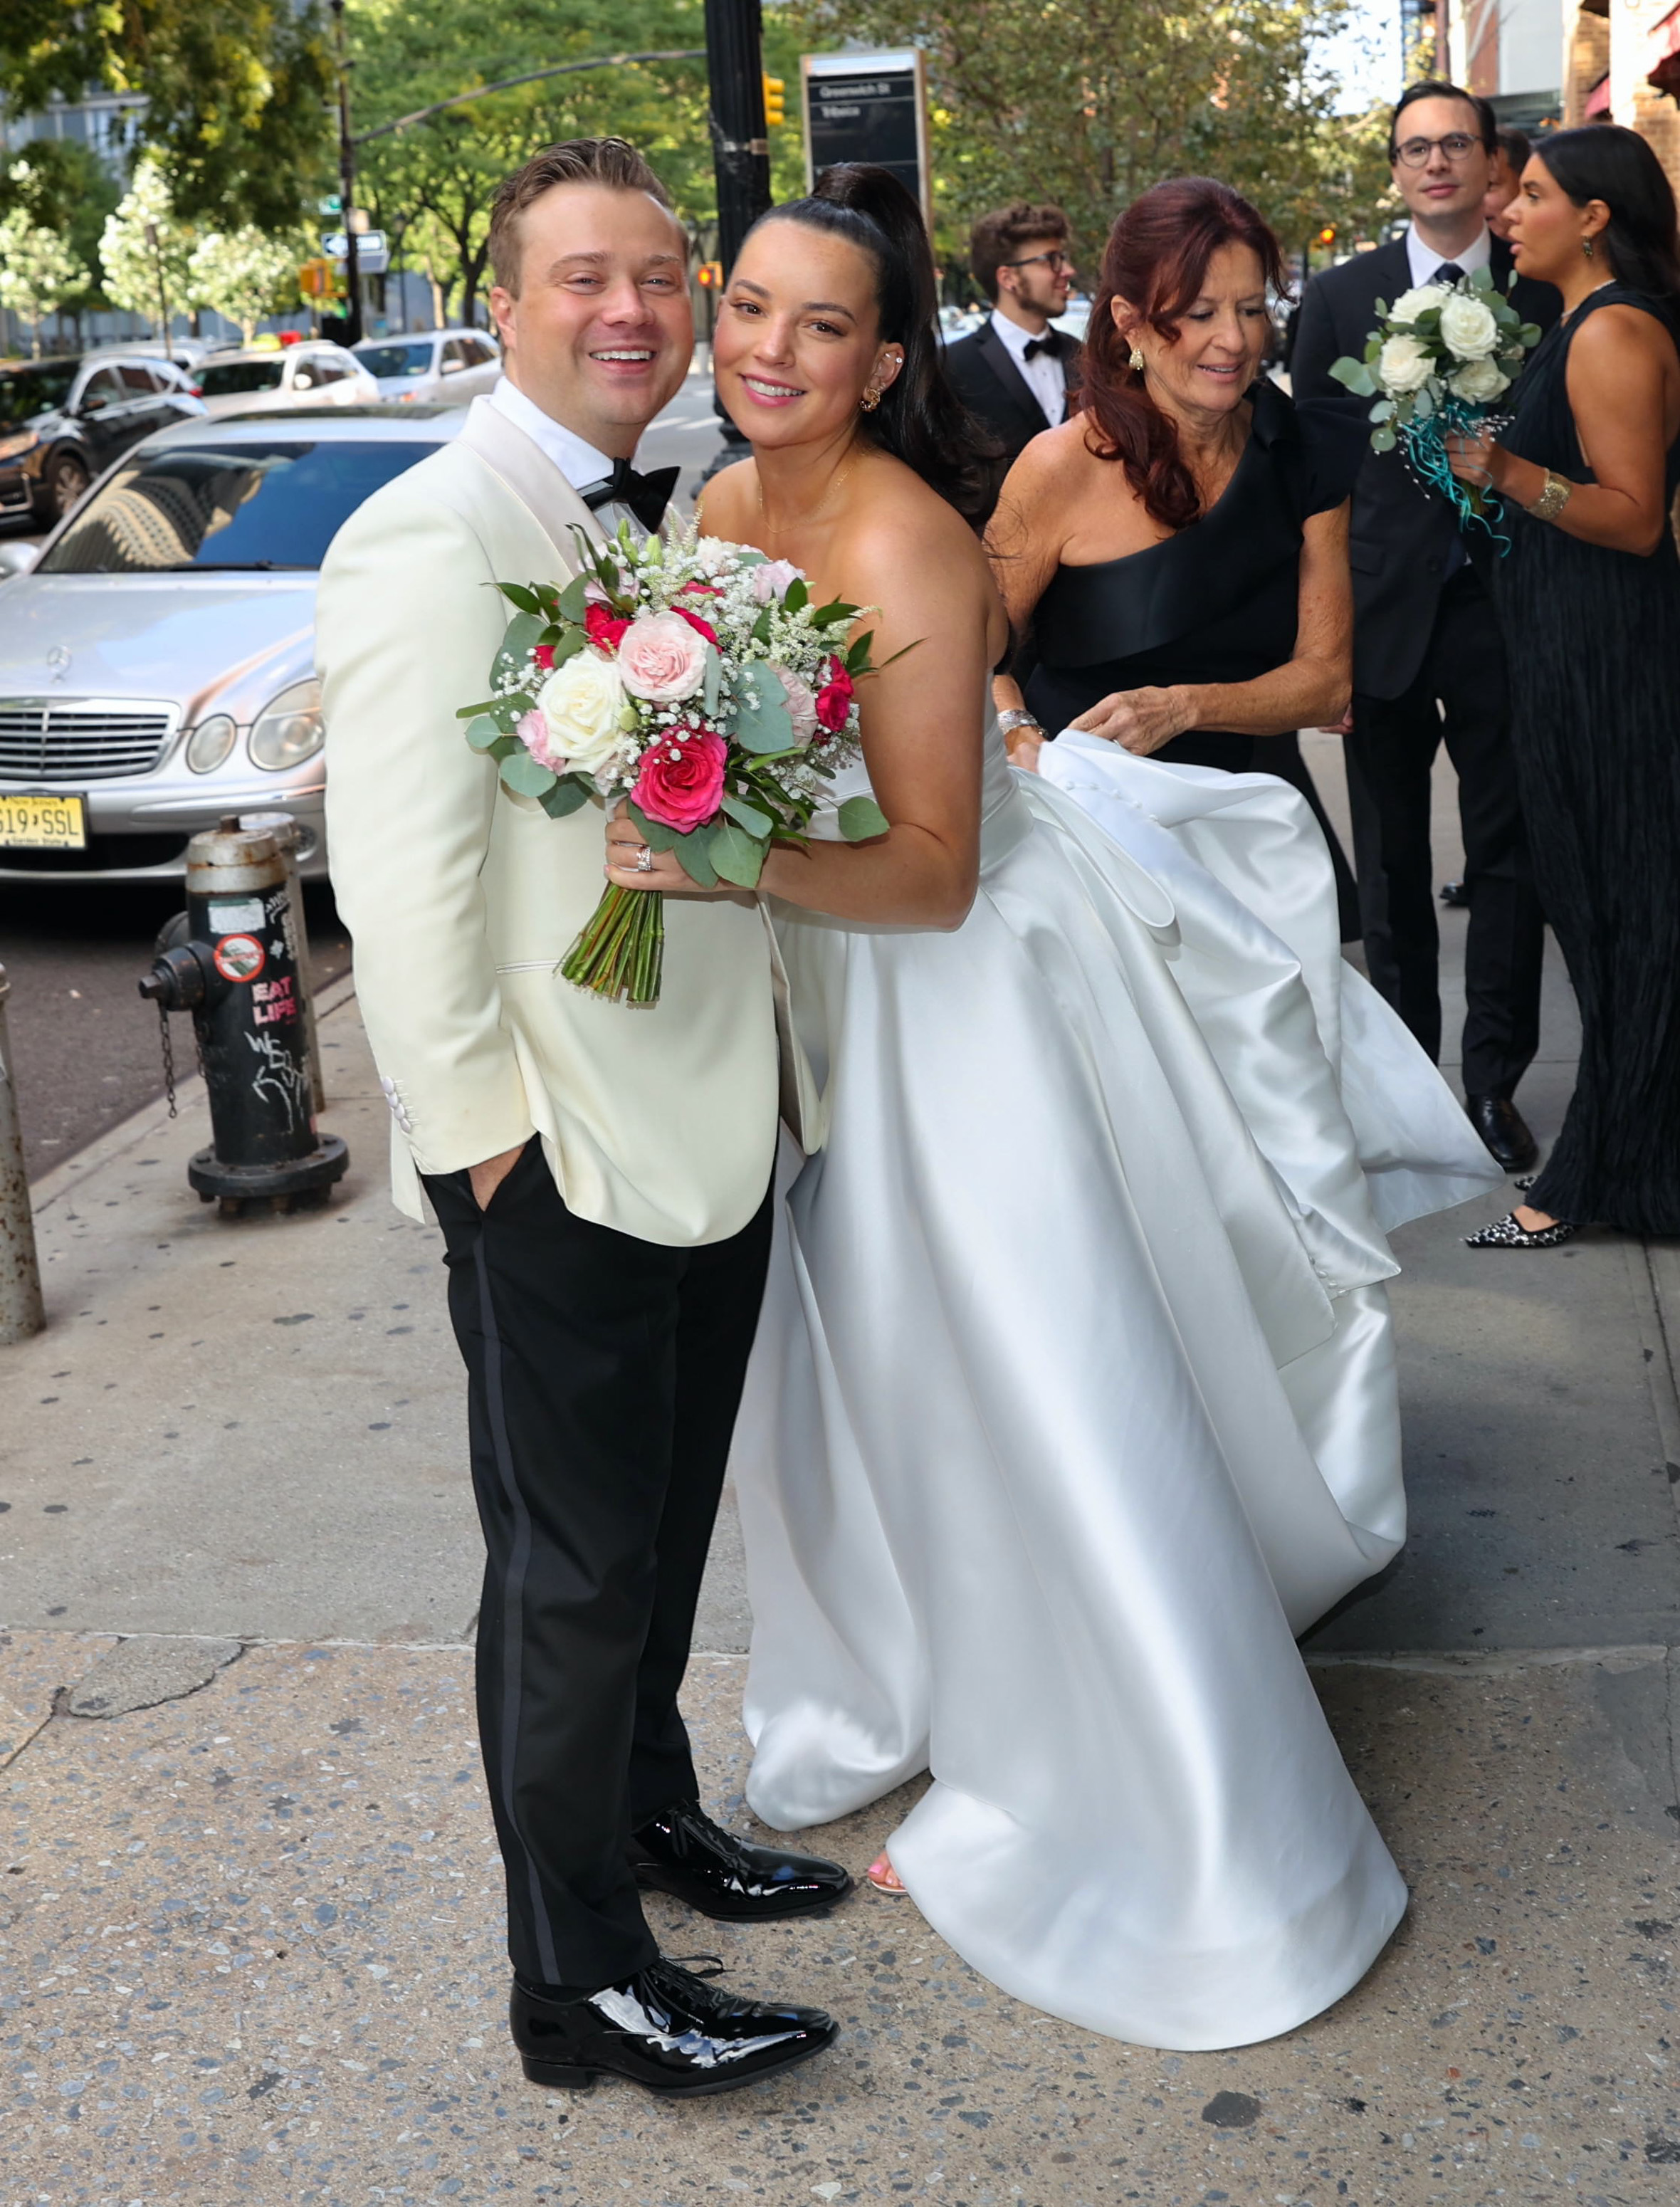 Zach Binder, Ciara, and Laura Schirripa on Ciara and Zach's wedding day in New York City on October 8, 2023 | Source: Getty Images